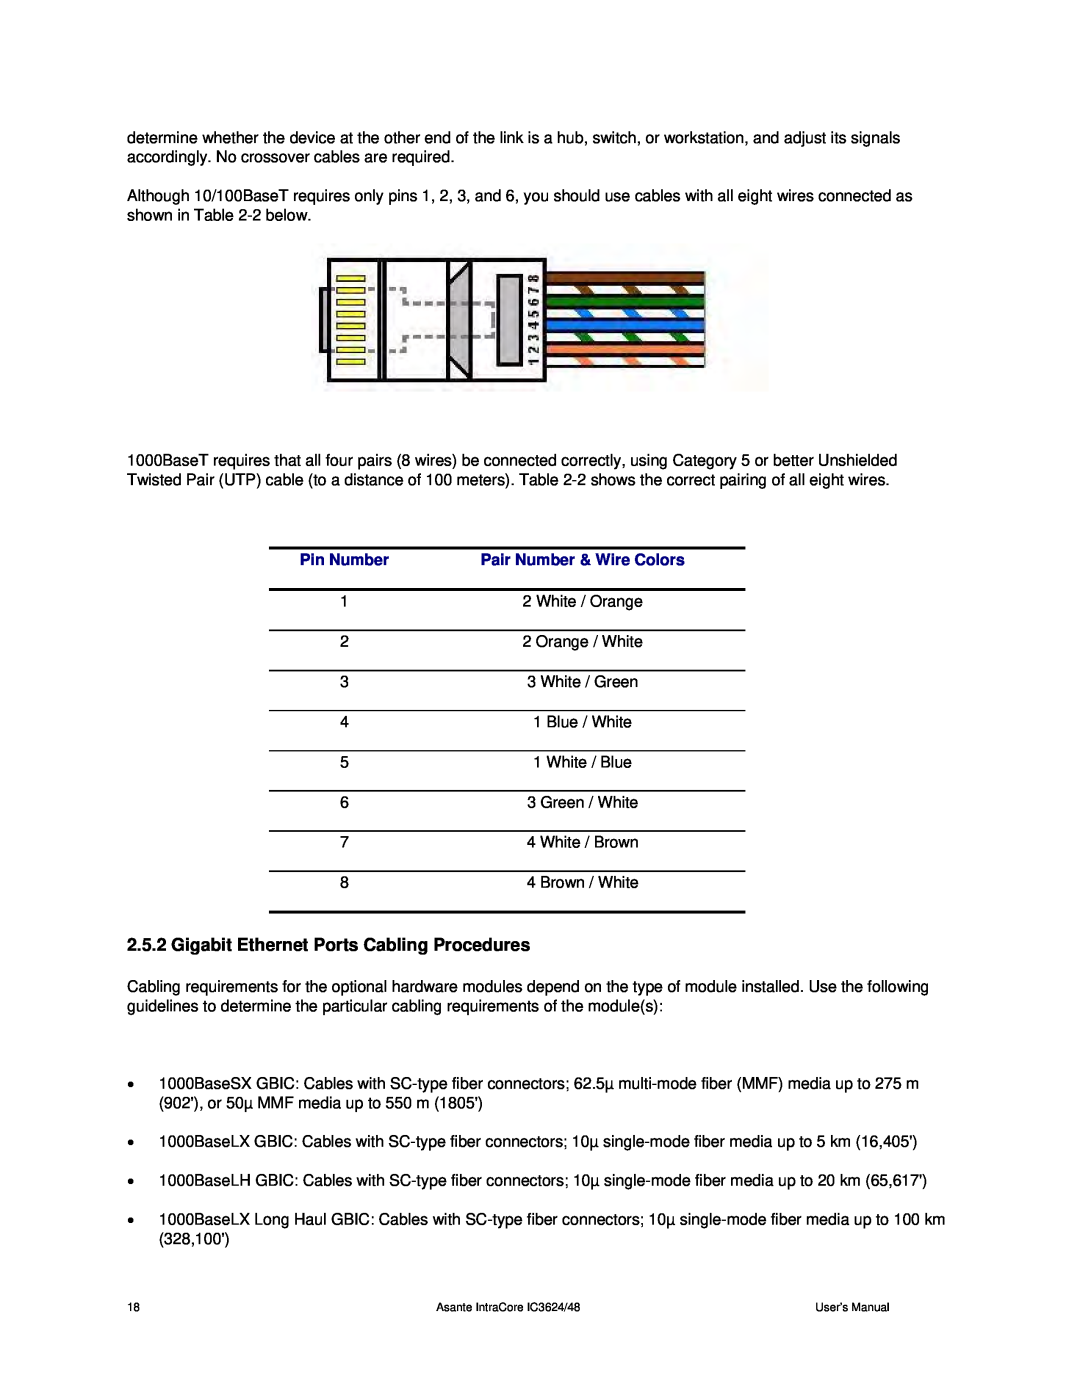 Asante Technologies 3624/48 user manual Gigabit Ethernet Ports Cabling Procedures, Pin Number, Pair Number & Wire Colors 